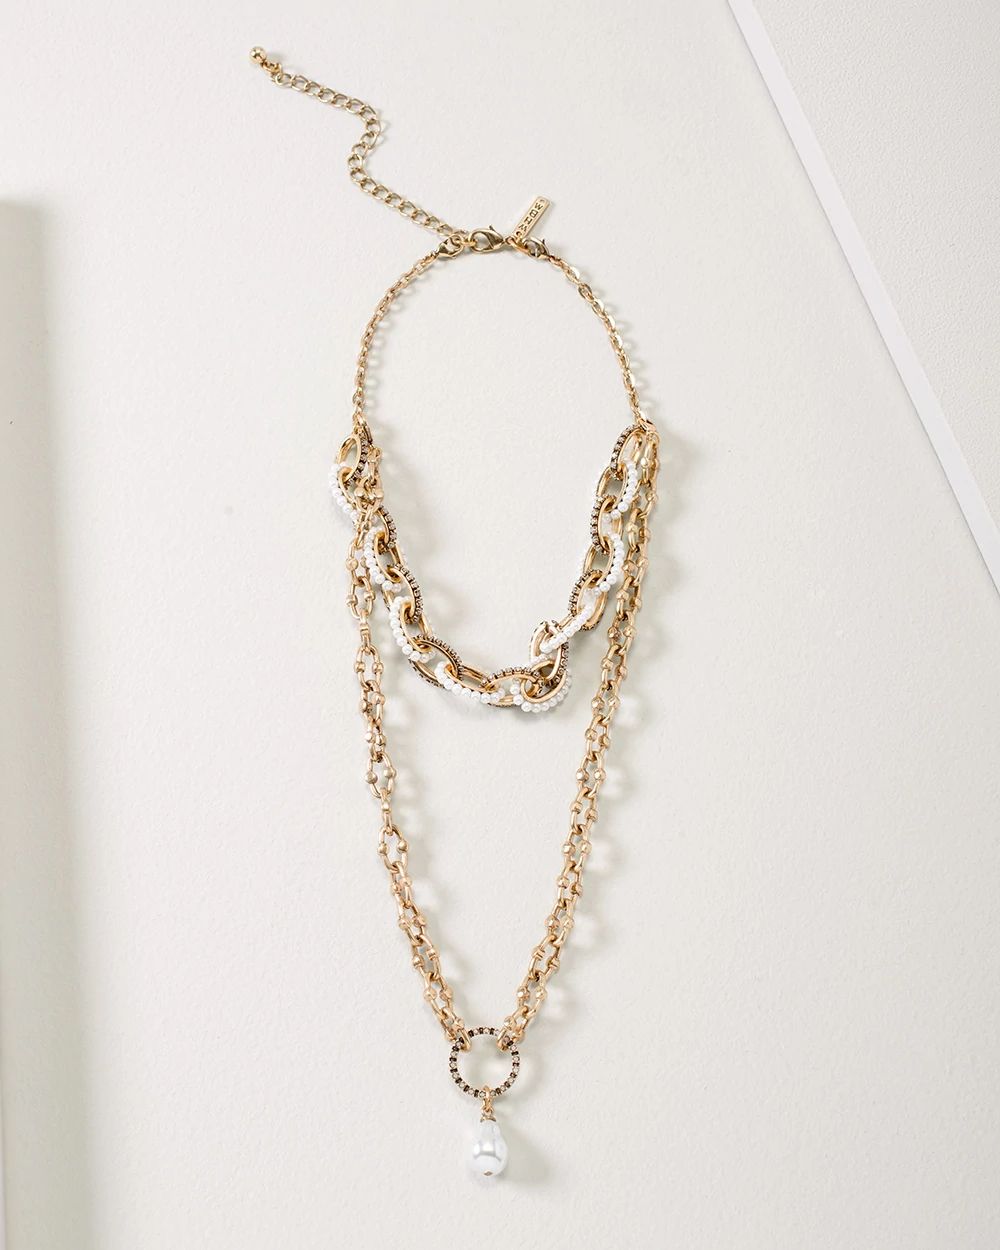 Antique Gold & Pearl Multi-Strand Short Necklace click to view larger image.